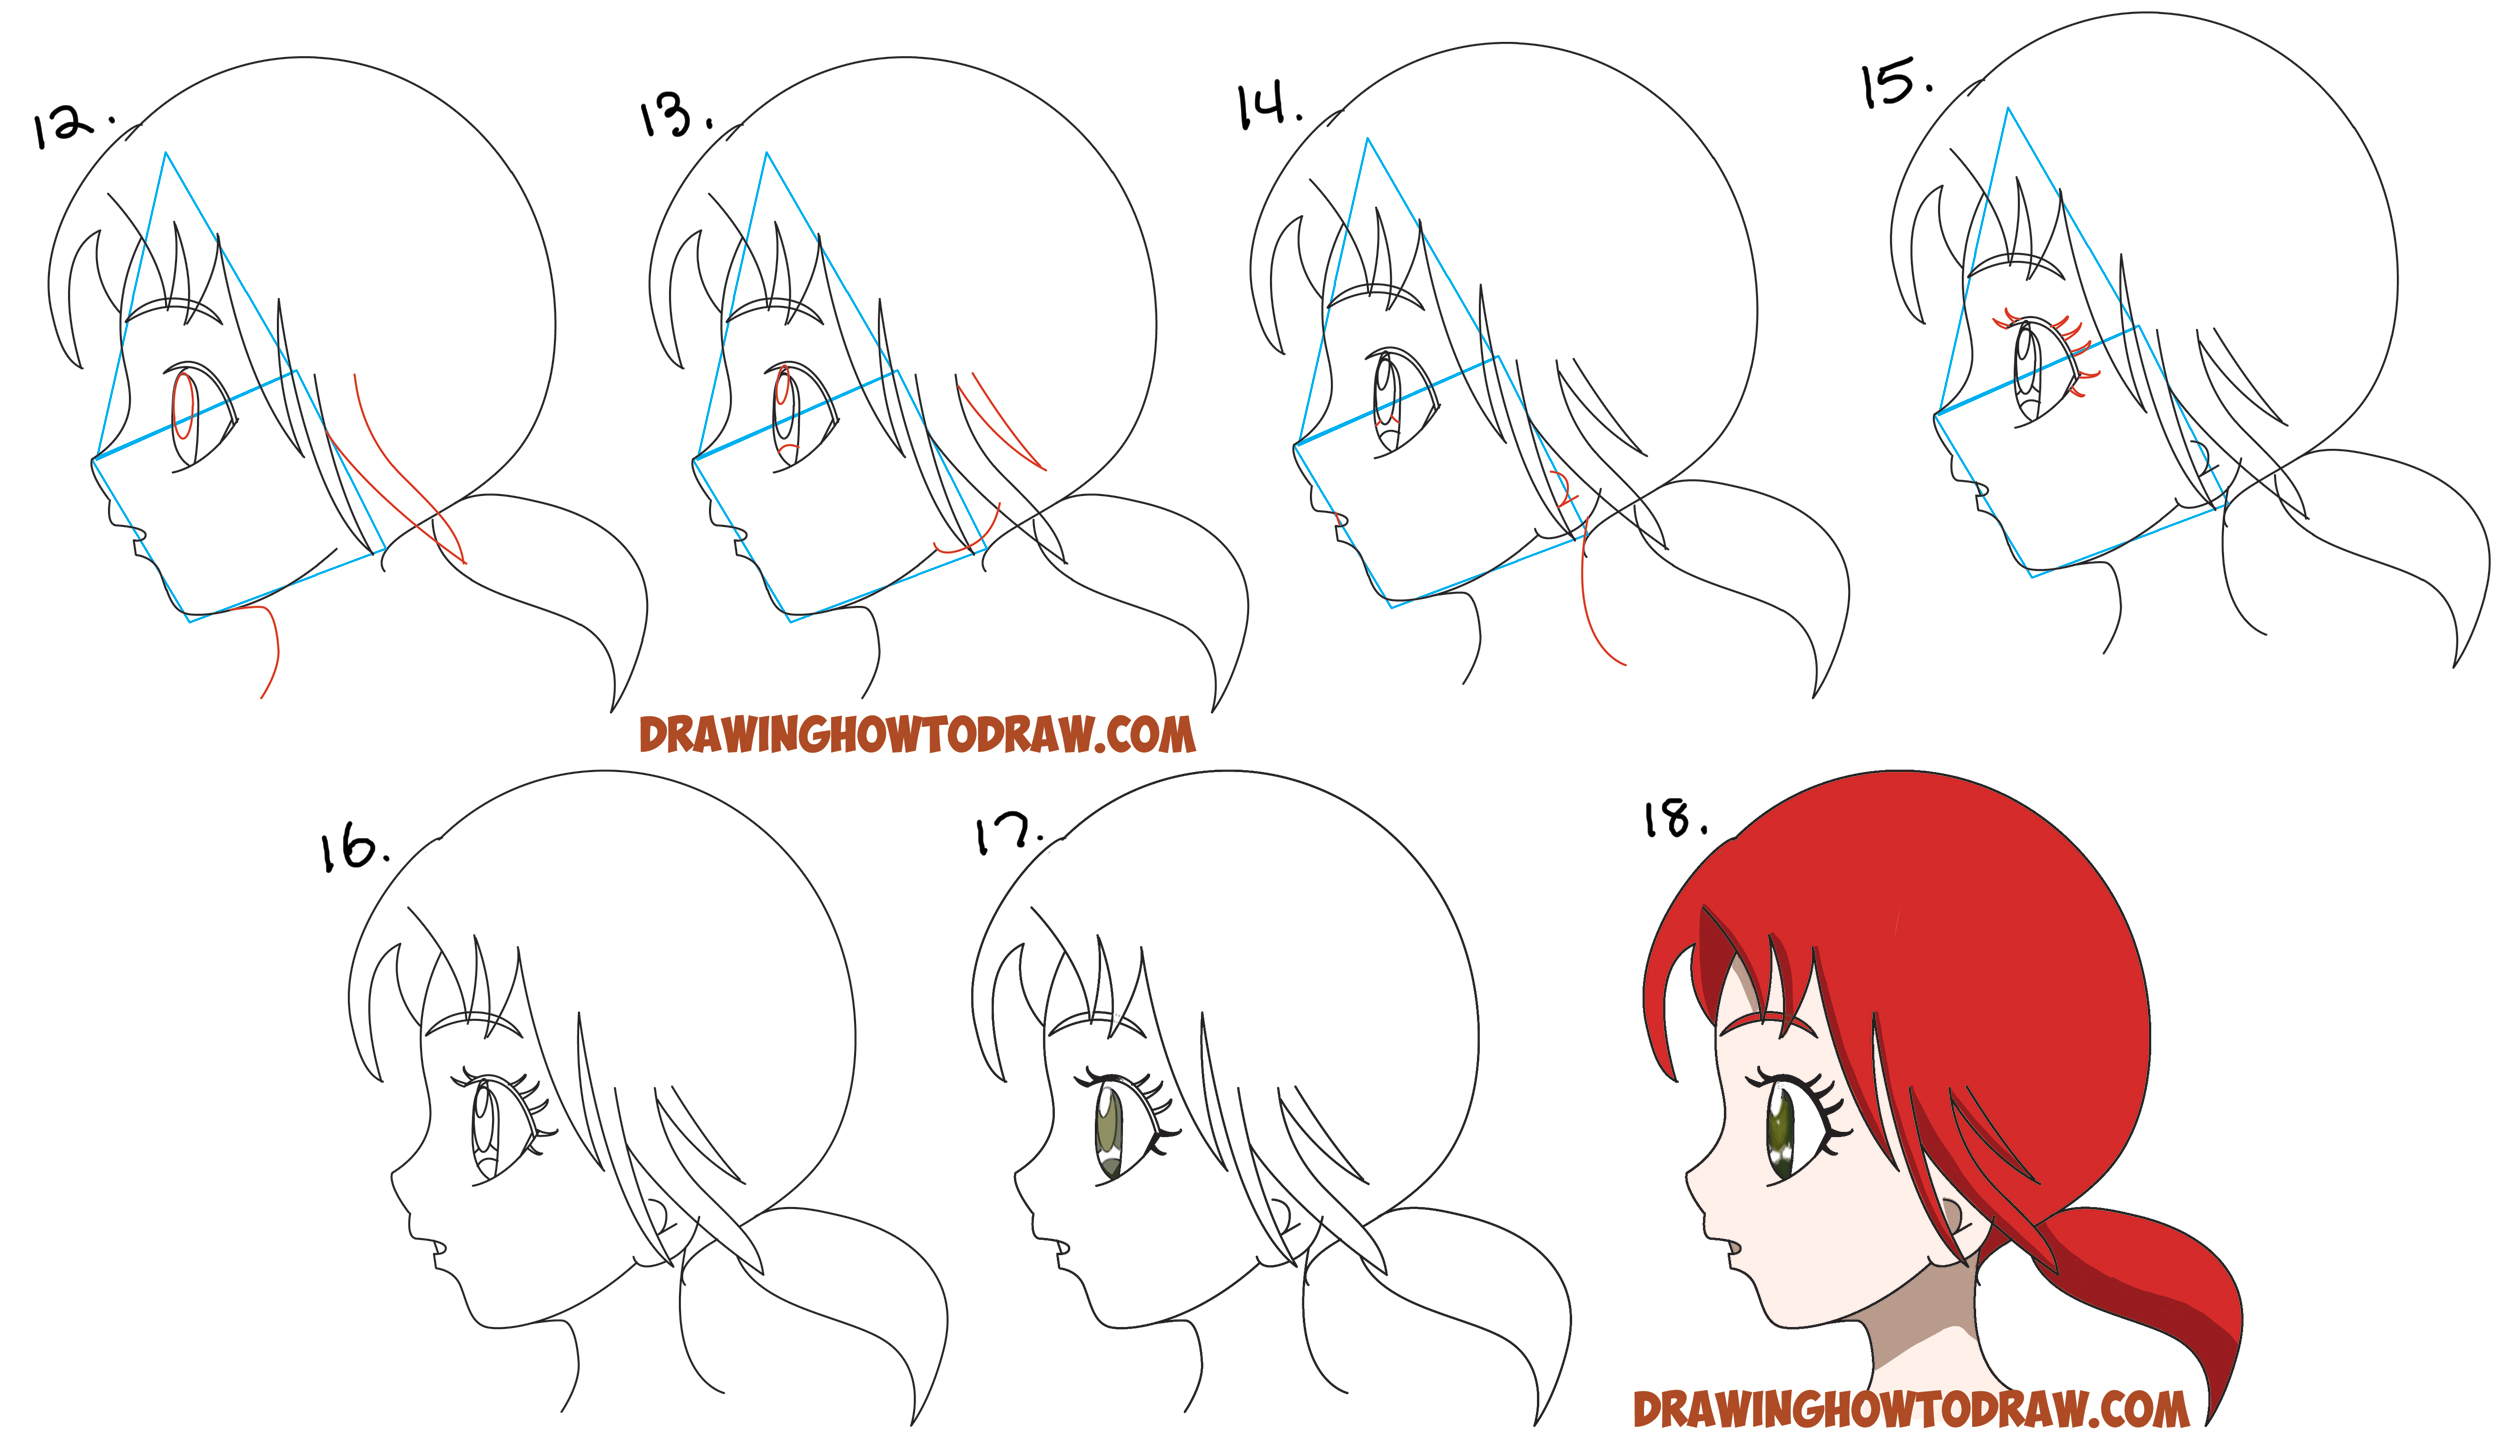 How to Draw Anime and Manga Eyes - Easy Step by Step Tutorial